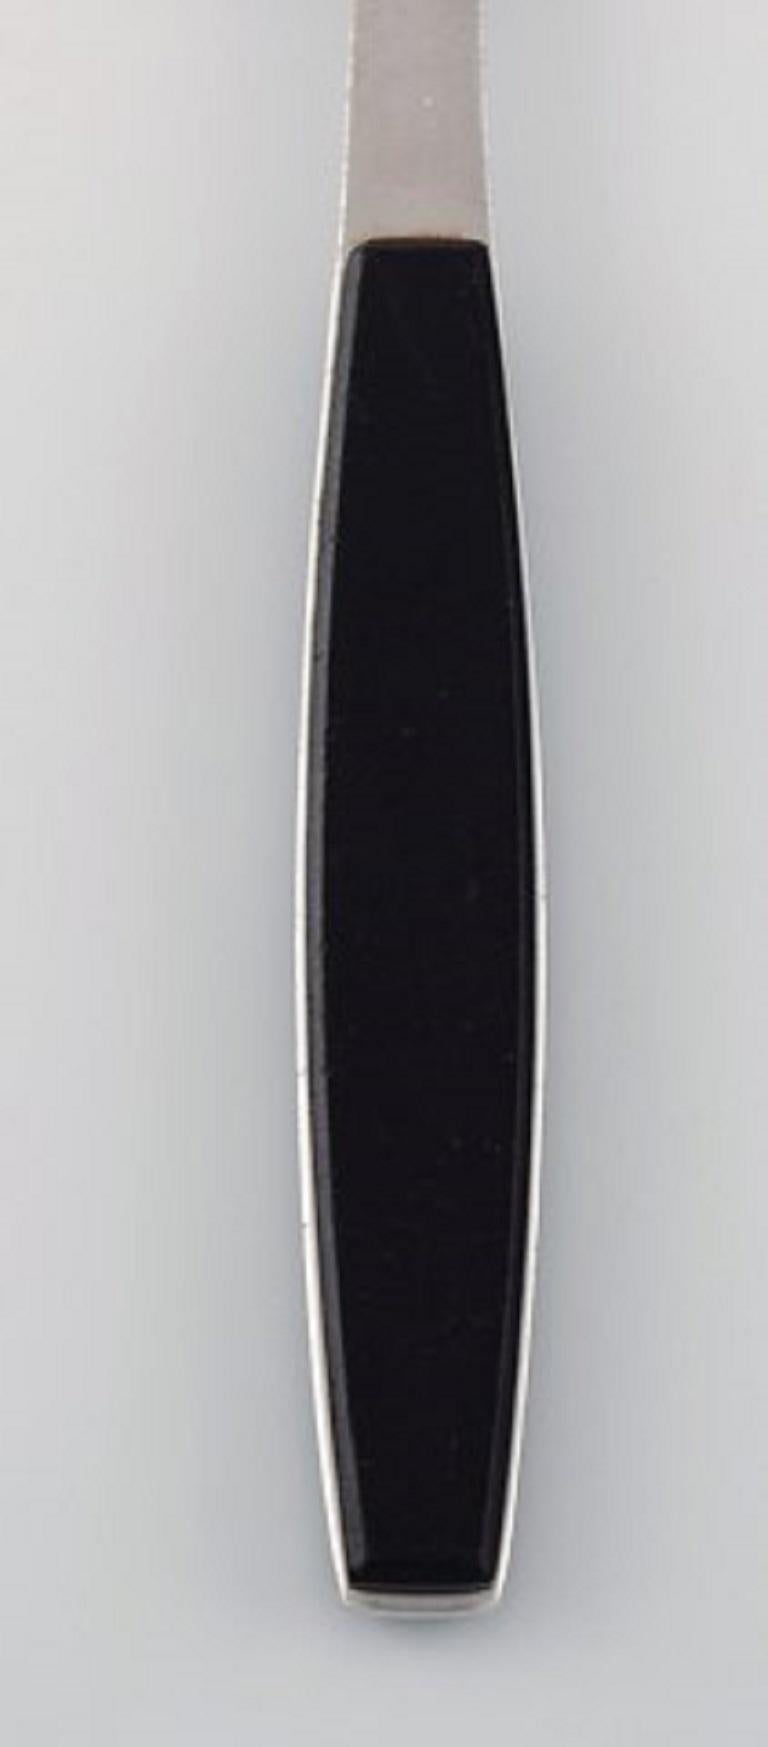 Henning Koppel for Georg Jensen. Strata dessert spoon in stainless steel and black plastic, 1960s-1970s. 
25 pcs in stock.
Measure: Length: 17.2 cm.
In very good condition.
Stamped.